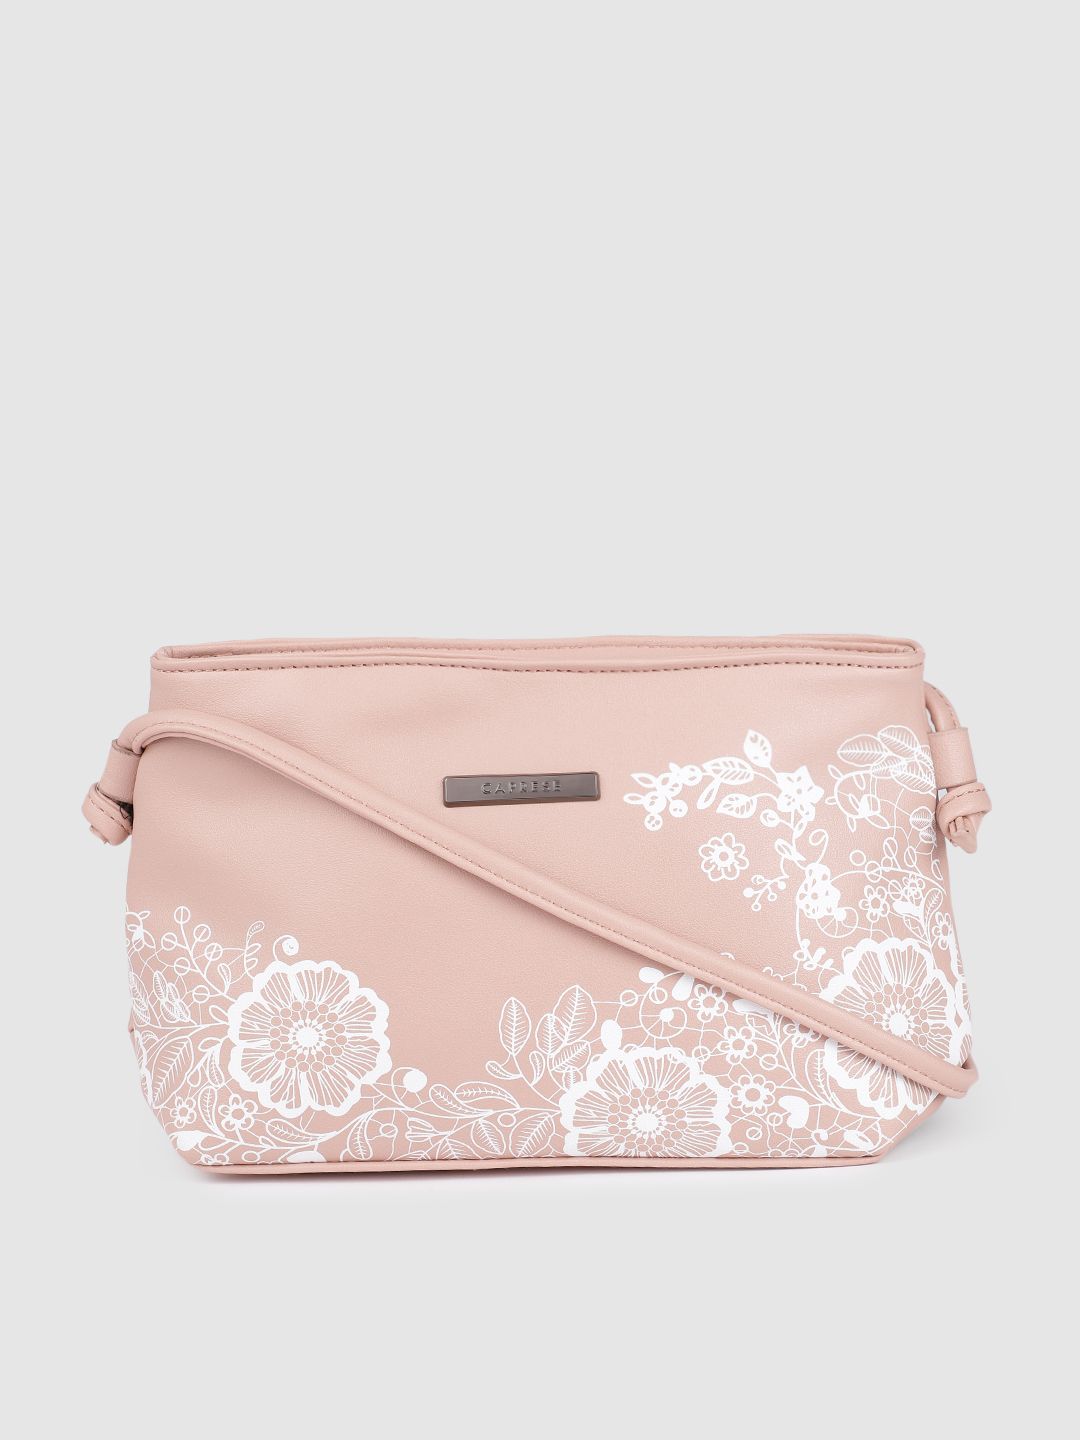 Caprese Pink Floral Printed Structured Sling Bag Price in India